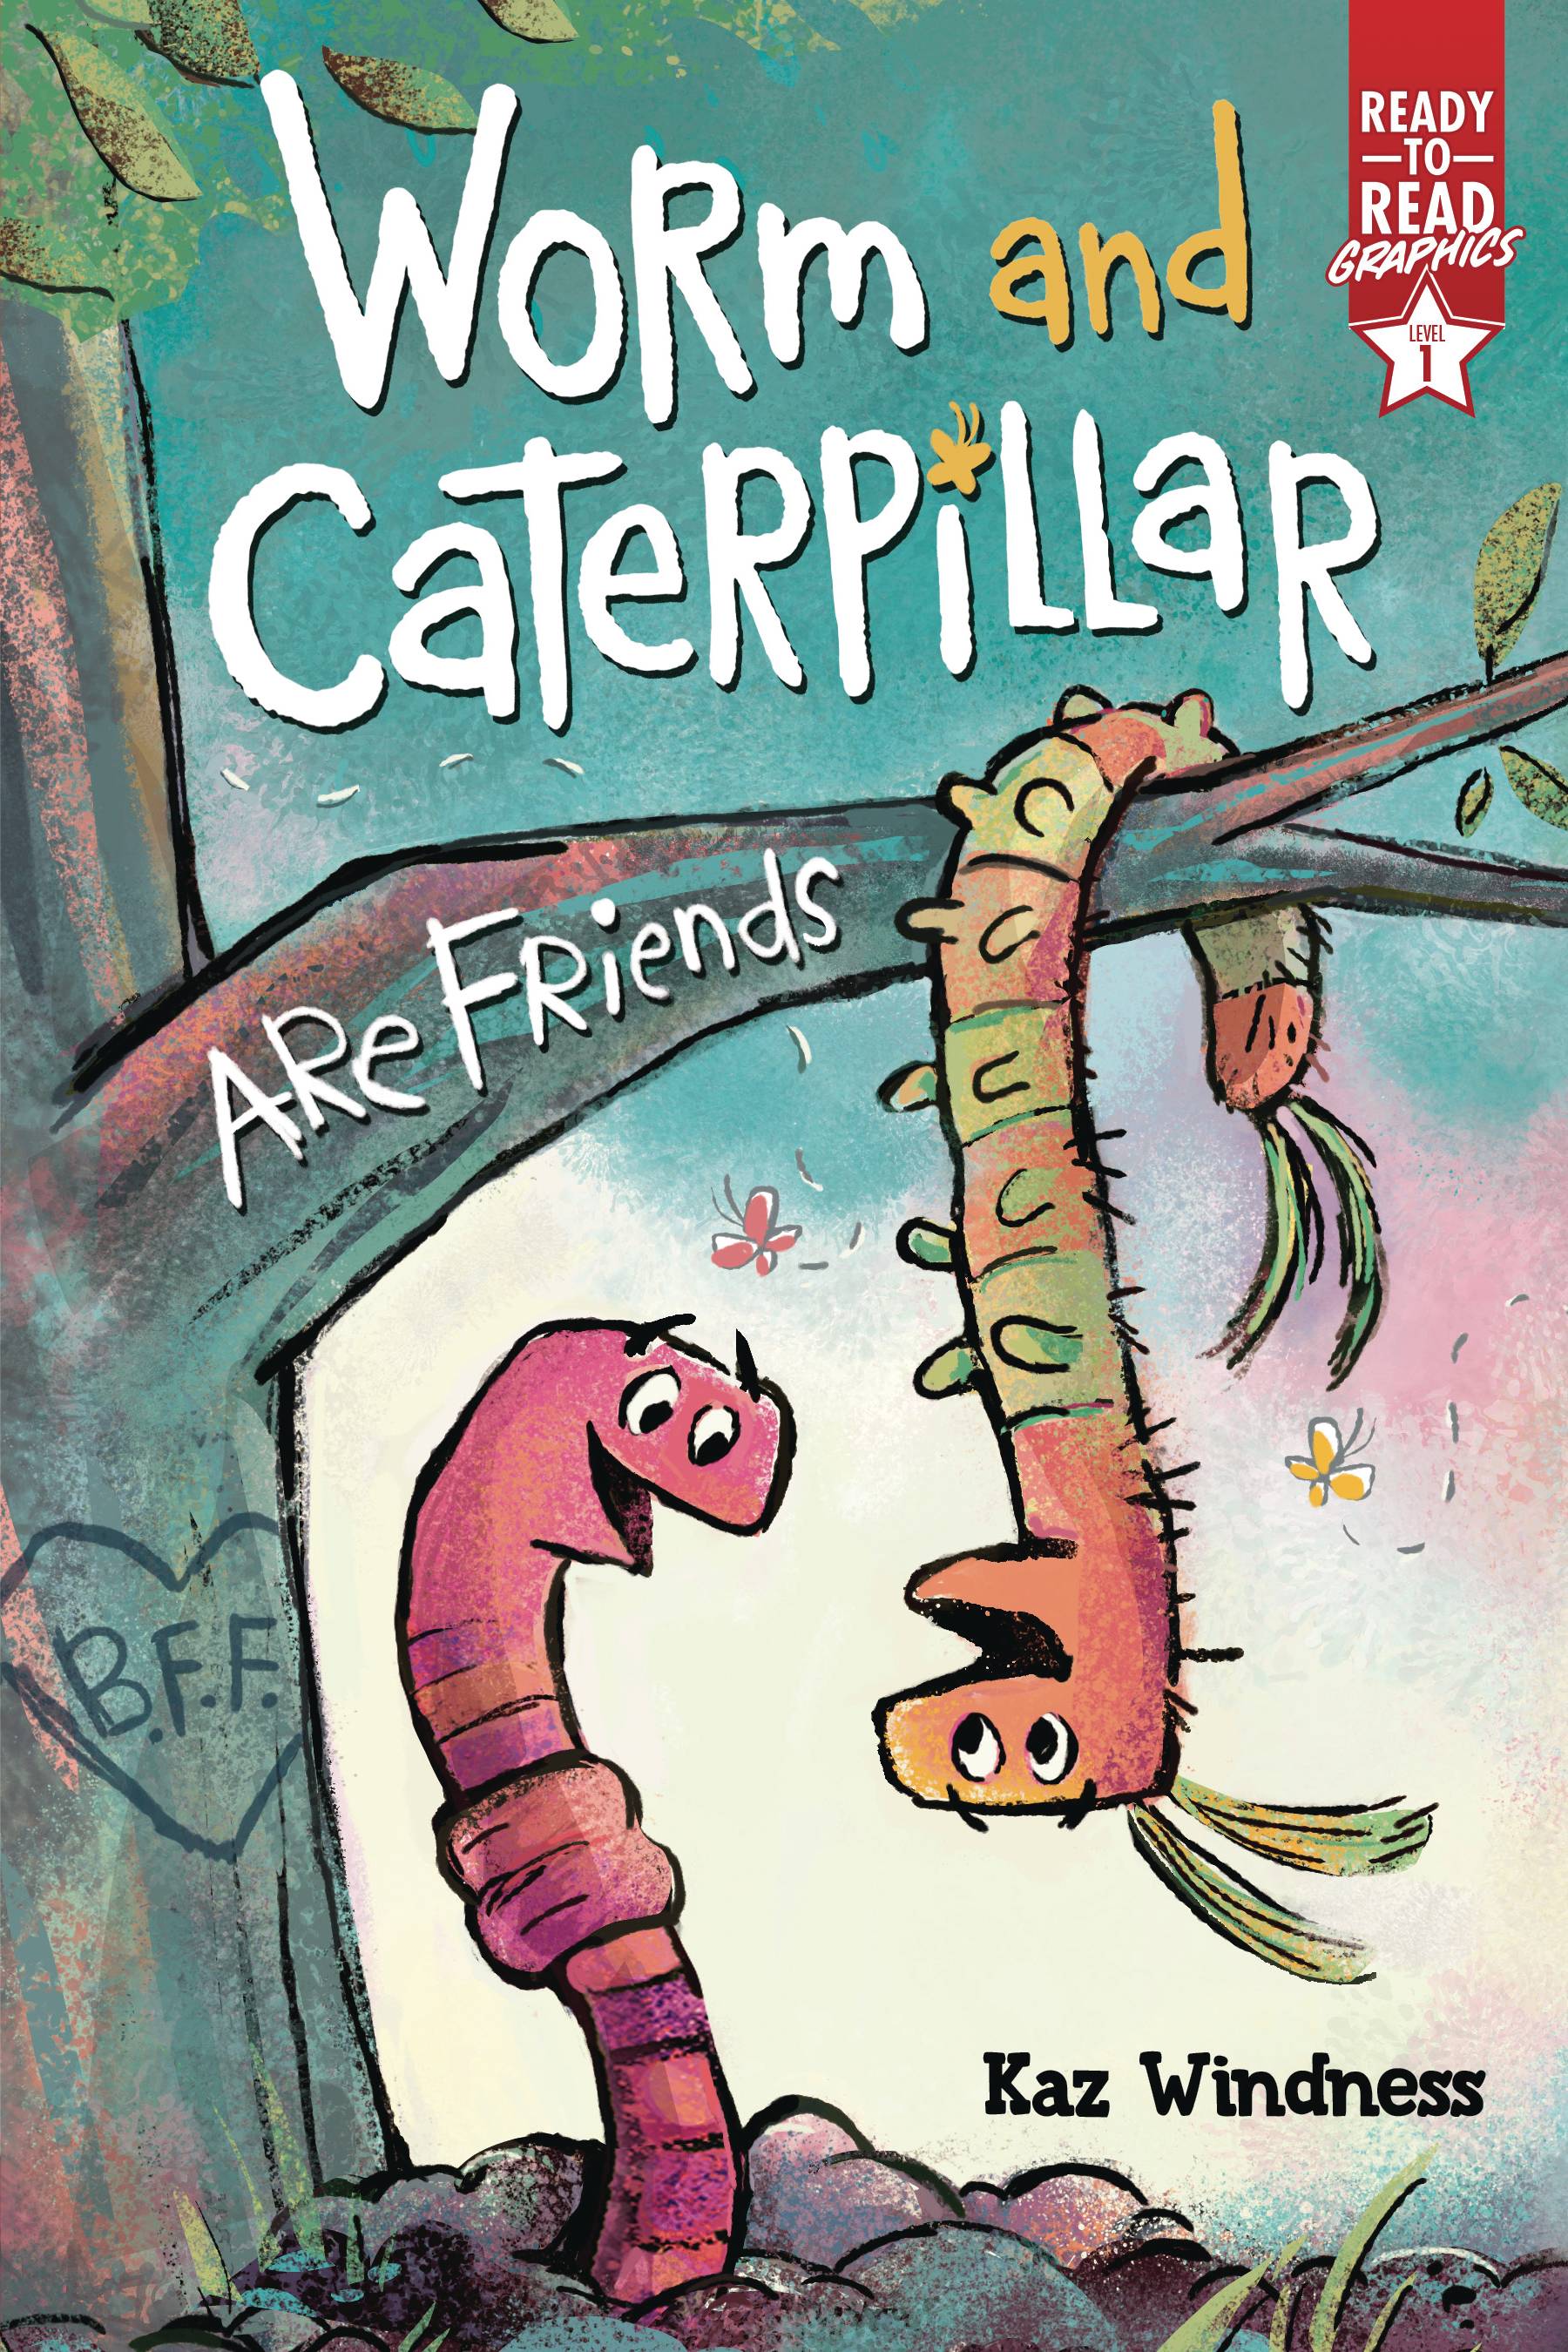 WORM AND CATERPILLAR ARE FRIEND READY TO READ GN